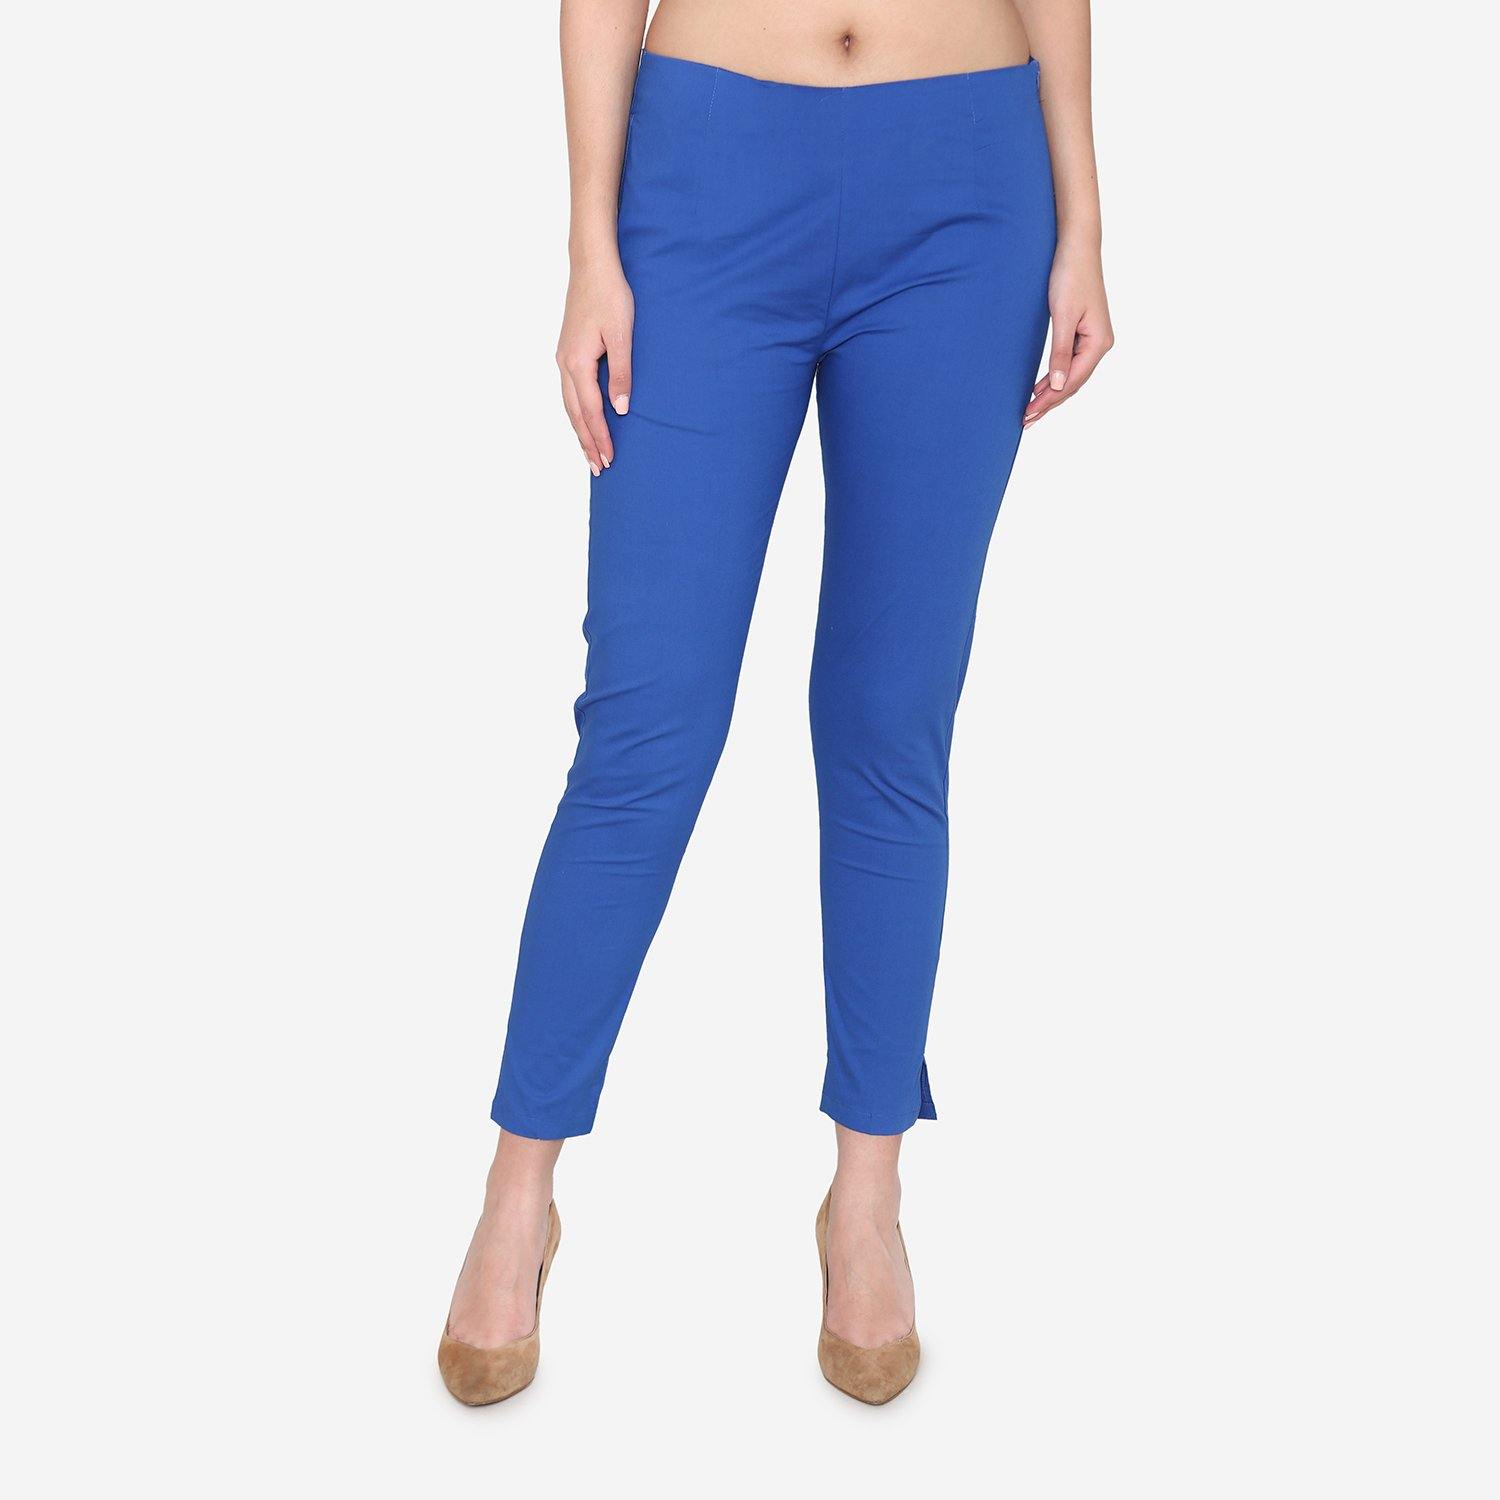 Dcot by Donear Mens Blue Cotton Trousers